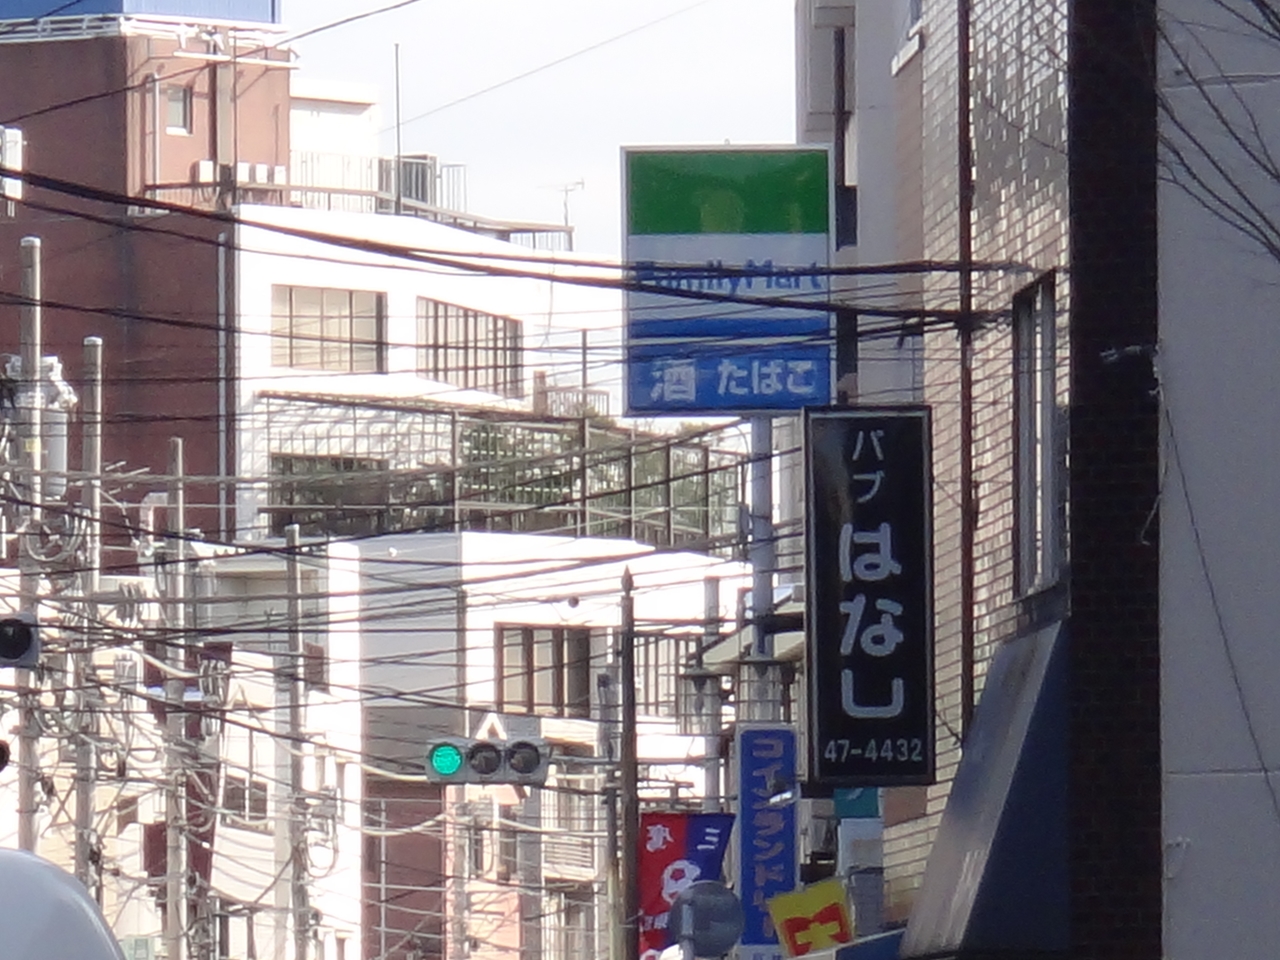 Other. The nearest convenience store